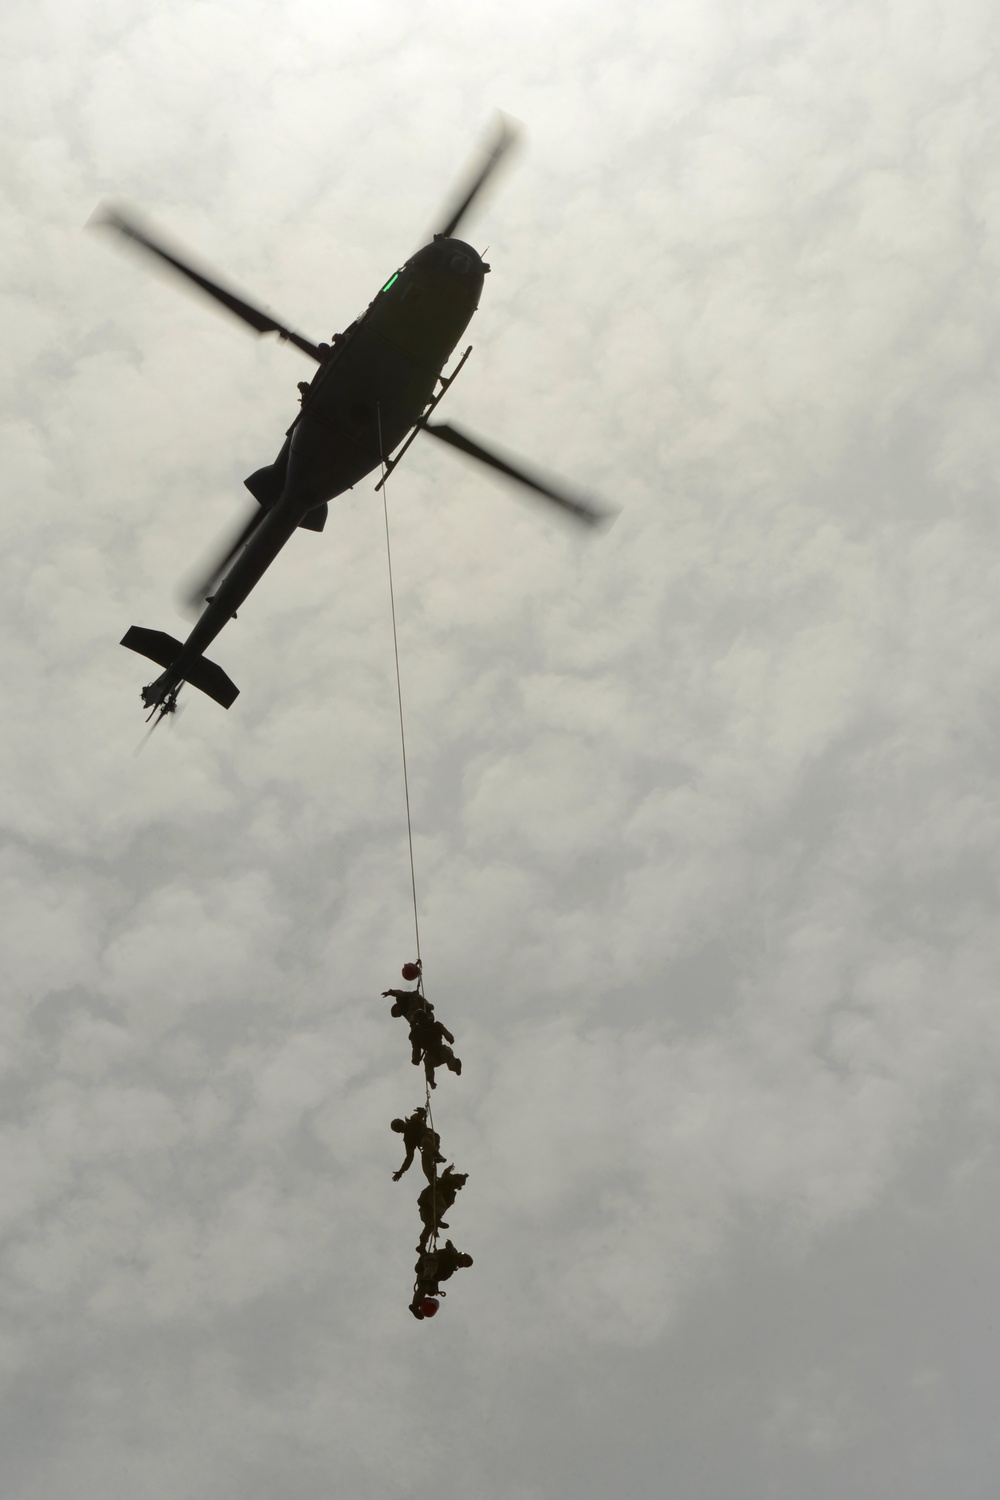 Special patrol insertion and extraction rigging training exercise